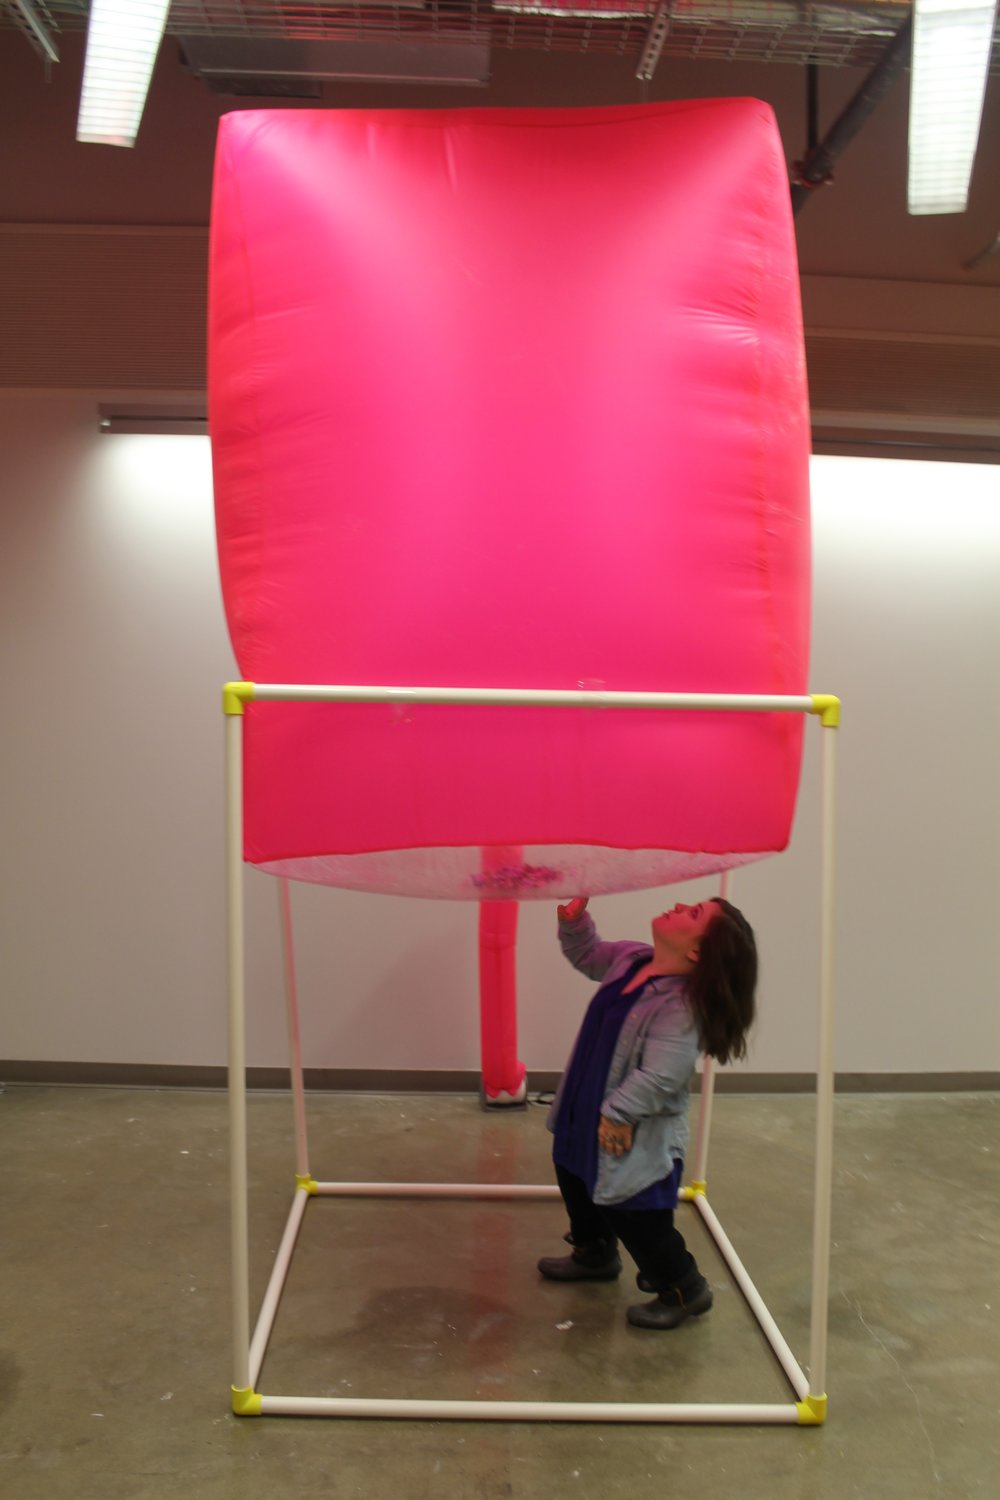 Image: a large pink inflated cube sits atop a white PVC structure; Bri Beck stands beneath it. "Negotiating Space: Othered by Design" by Bri Beck, courtesy of the artist.